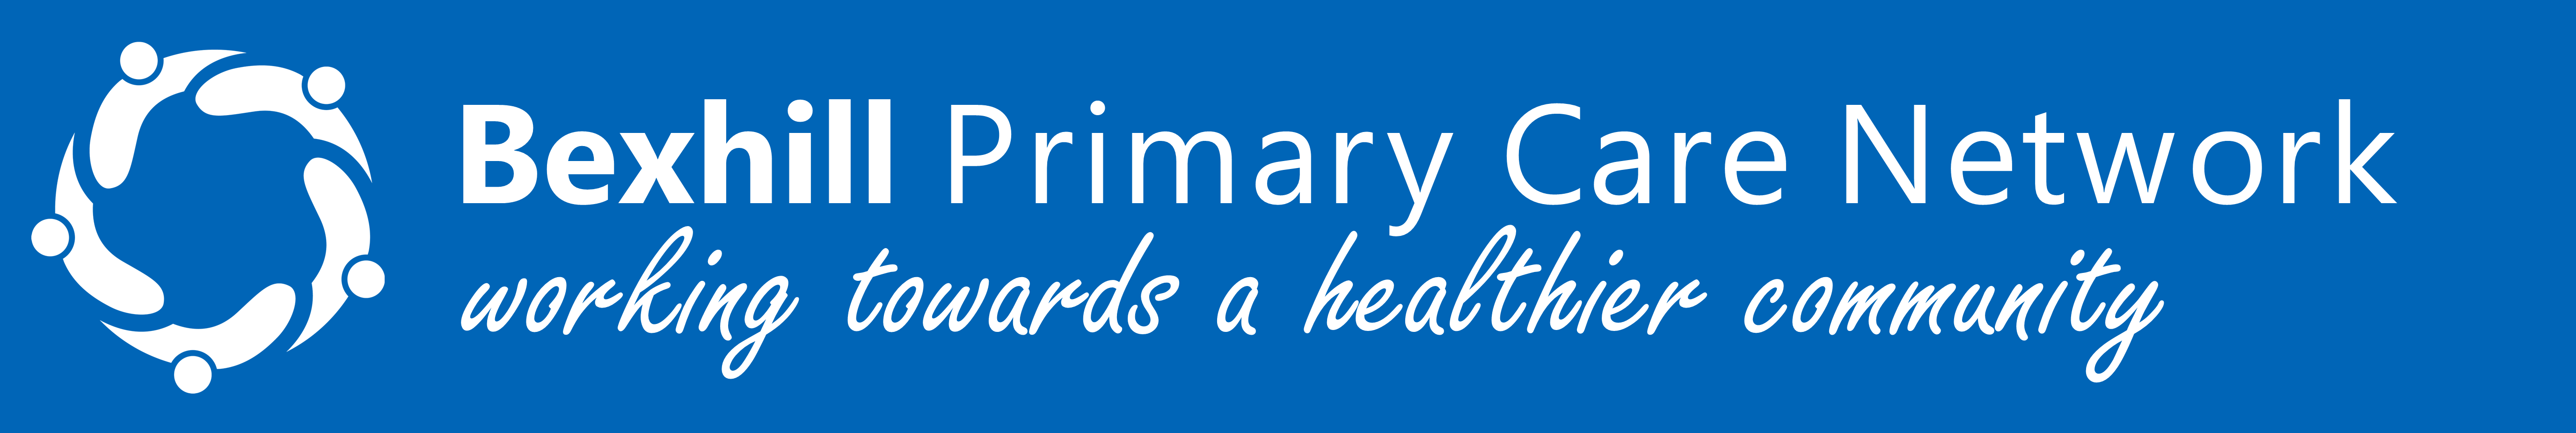 Bexhill Primary Care Network logo and homepage link